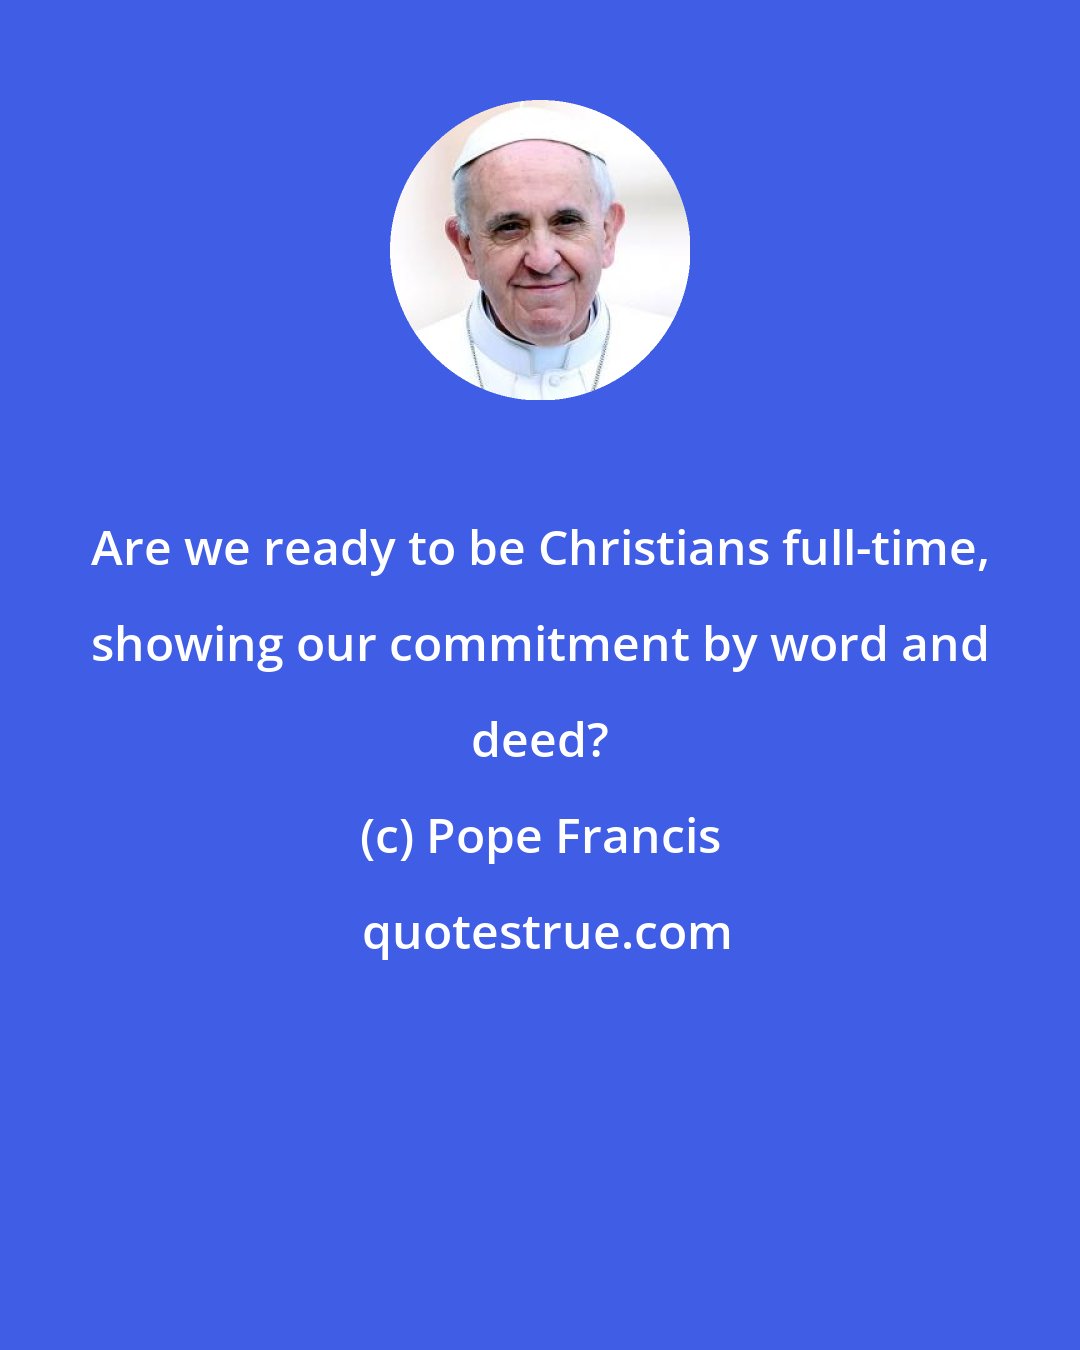 Pope Francis: Are we ready to be Christians full-time, showing our commitment by word and deed?